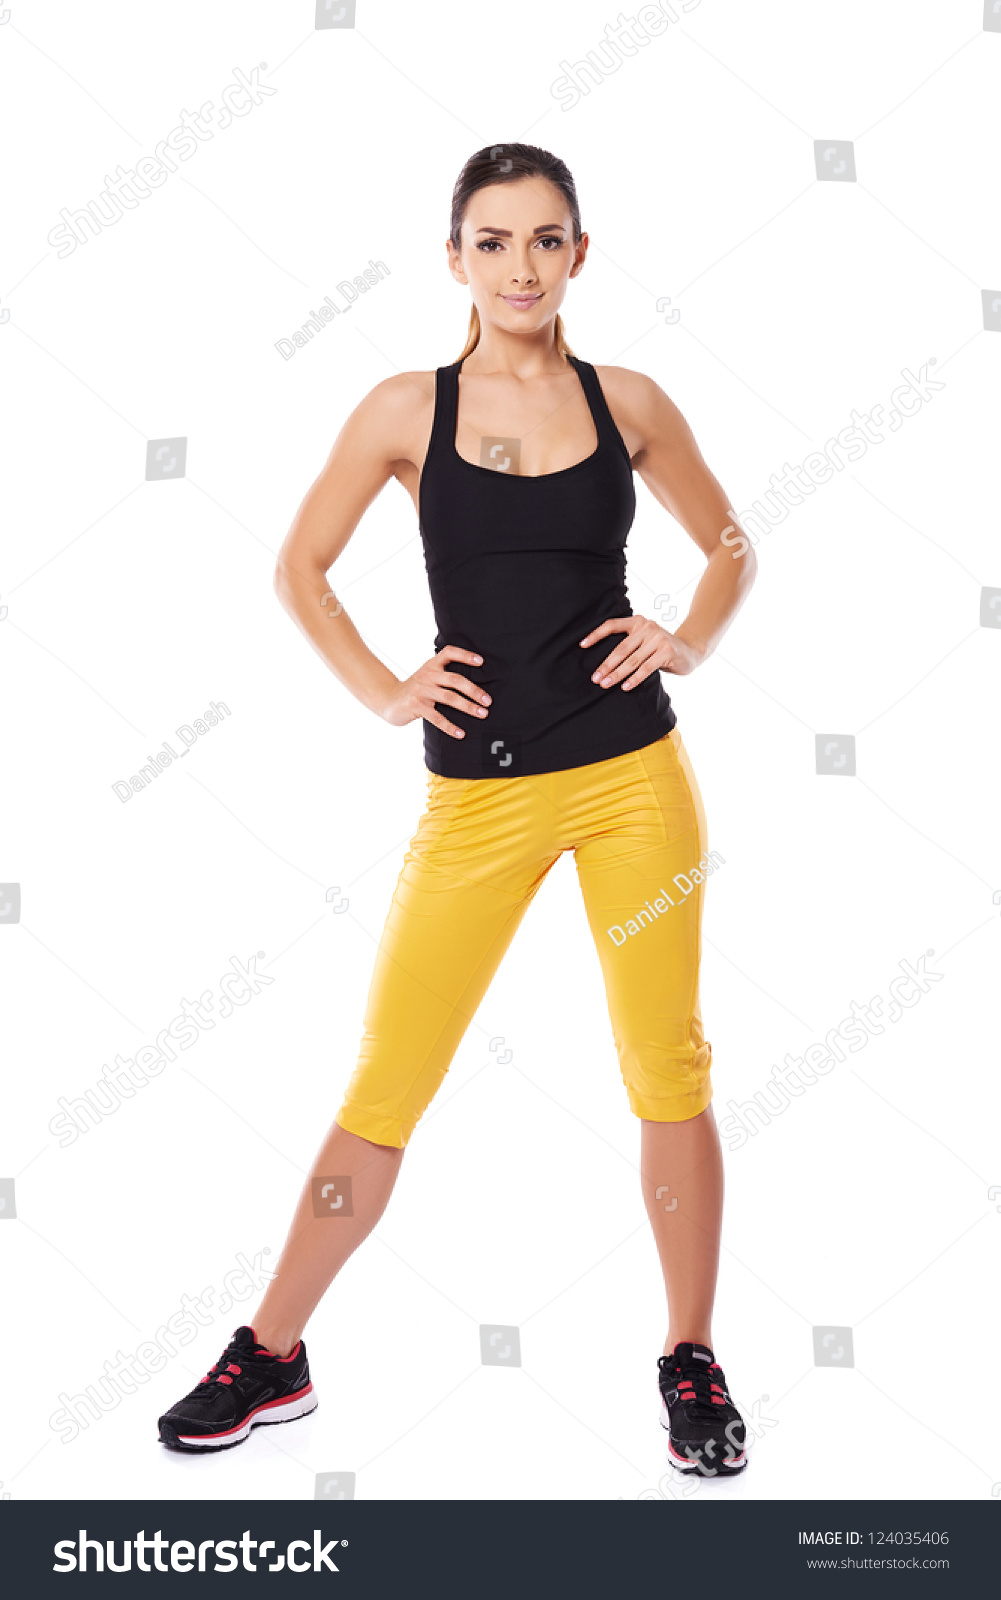 Fit Woman Athlete In Gym Clothes Posing Standing Facing The Camera With ...